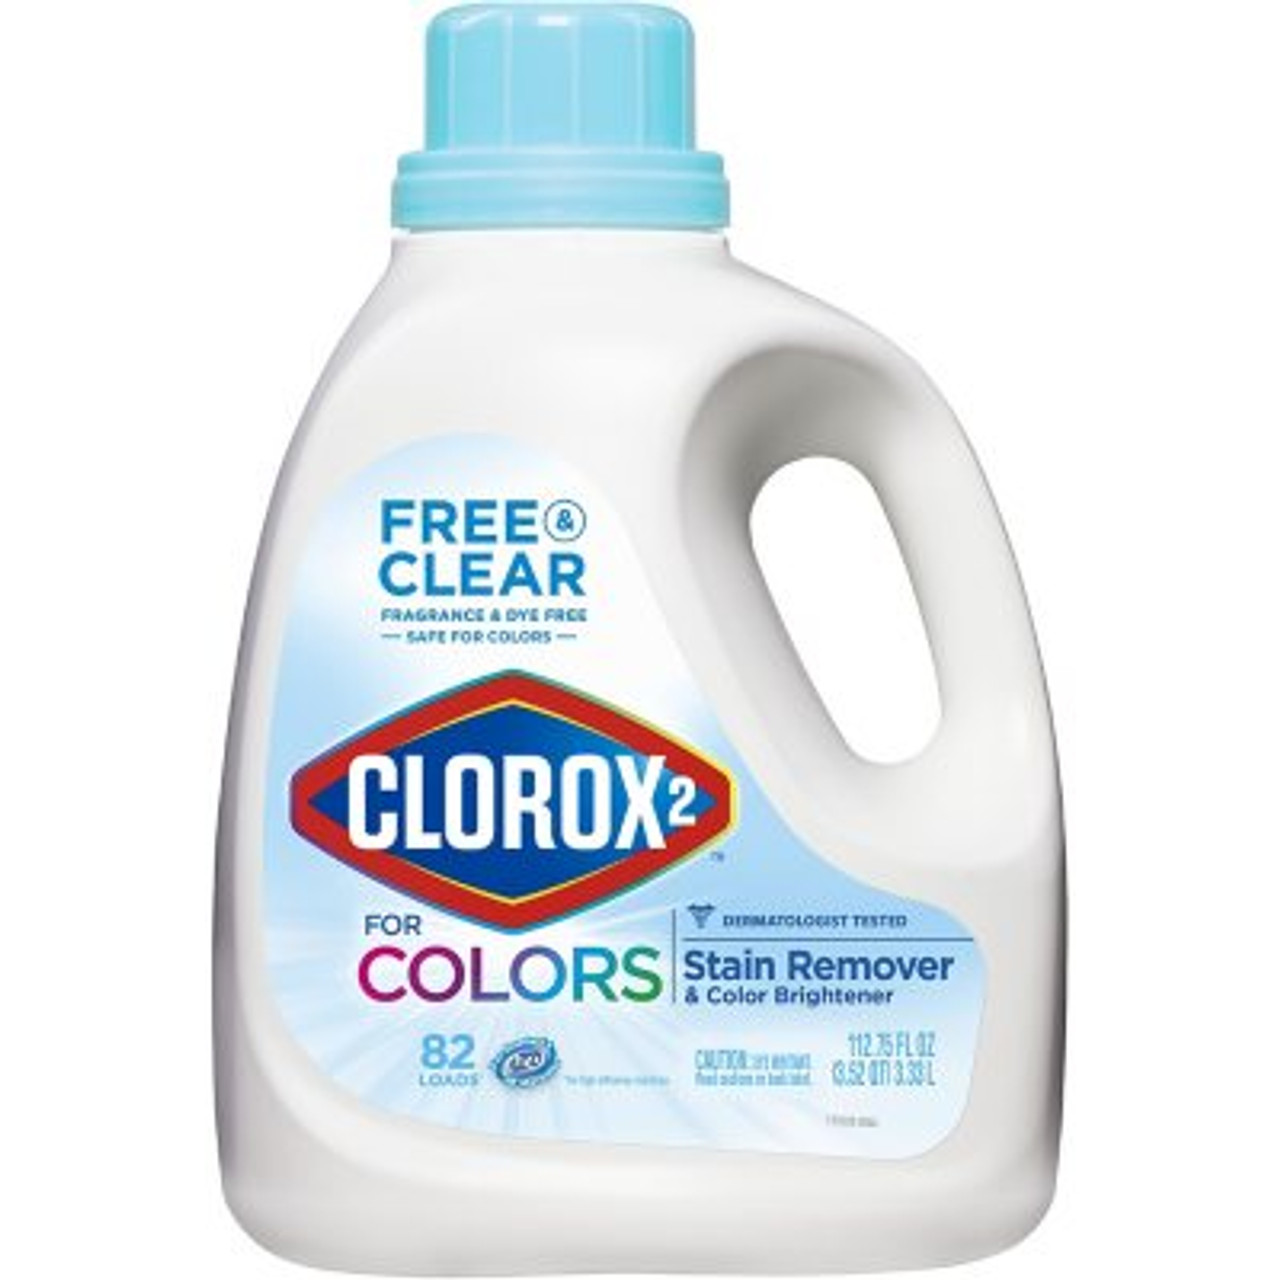 Clorox 2 for Colors Free & Clear Stain Remover and Color Brightener (112 fl. oz.) - [From 69.00 - Choose pk Qty ] - *Ships from Miami